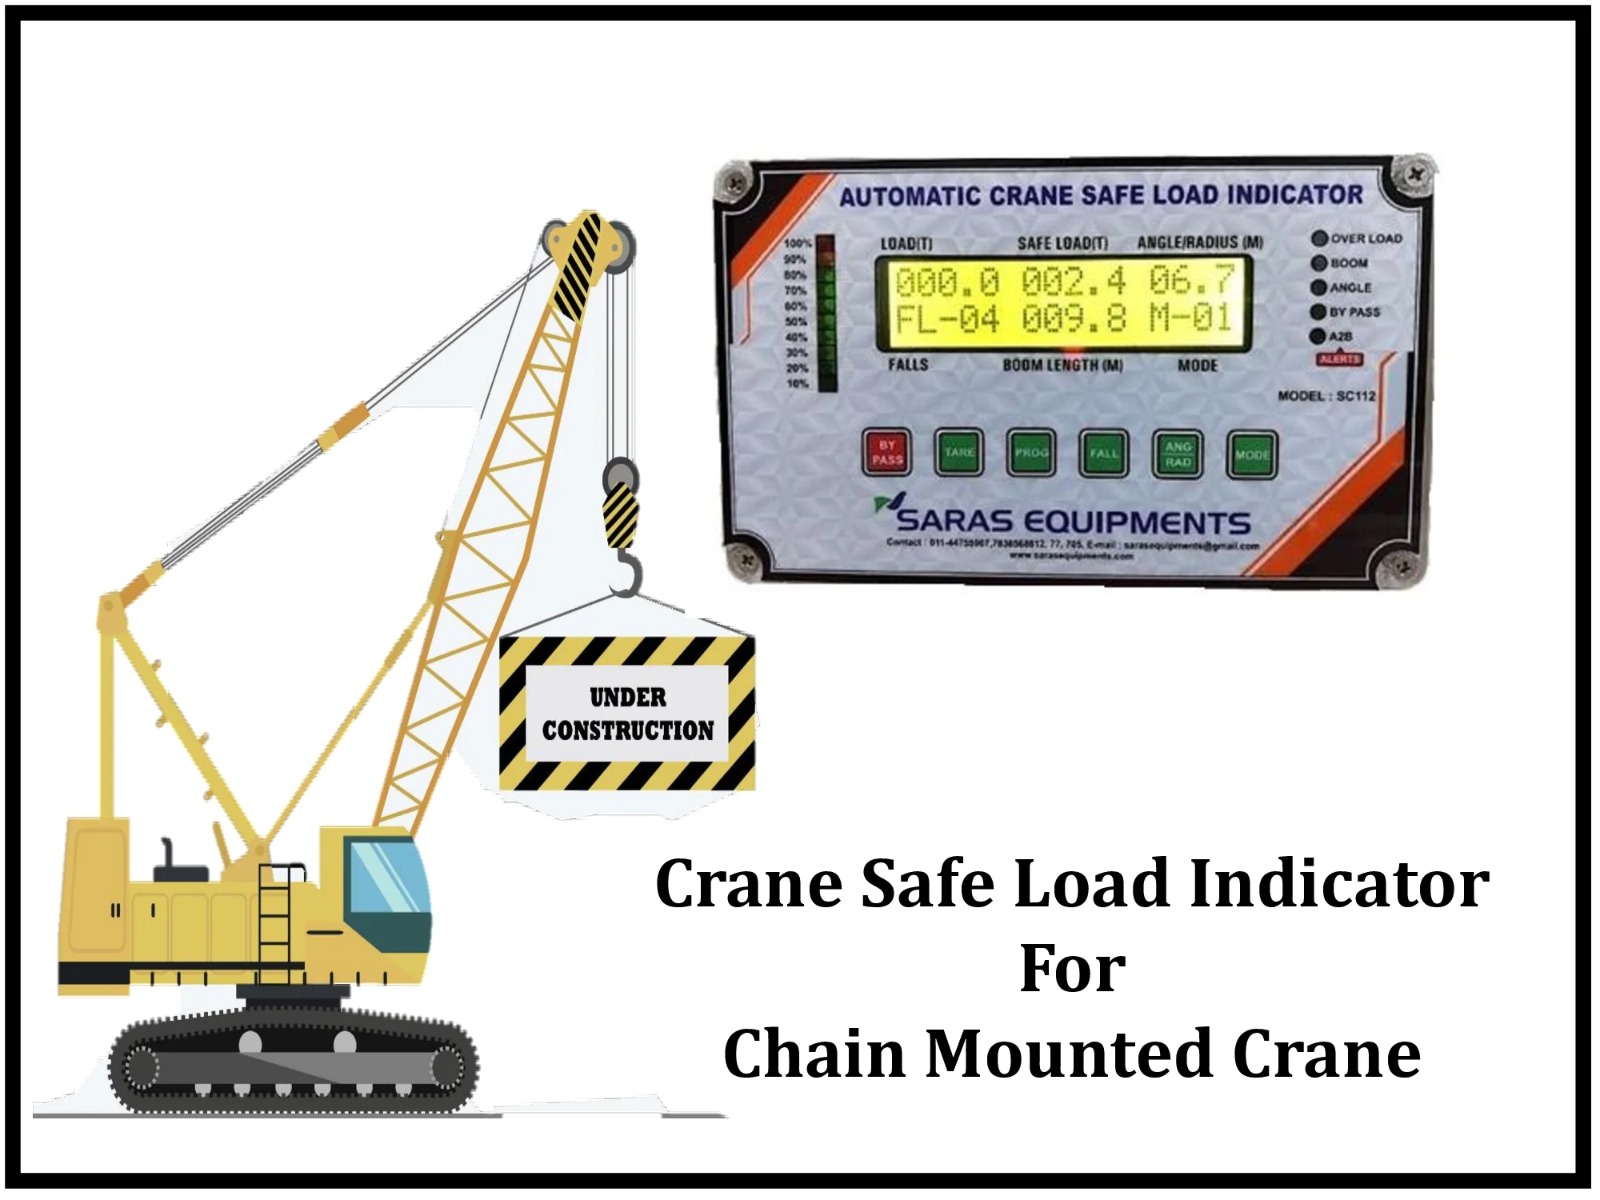 Crane Safe Load Indicator for Chain Mounted Crane